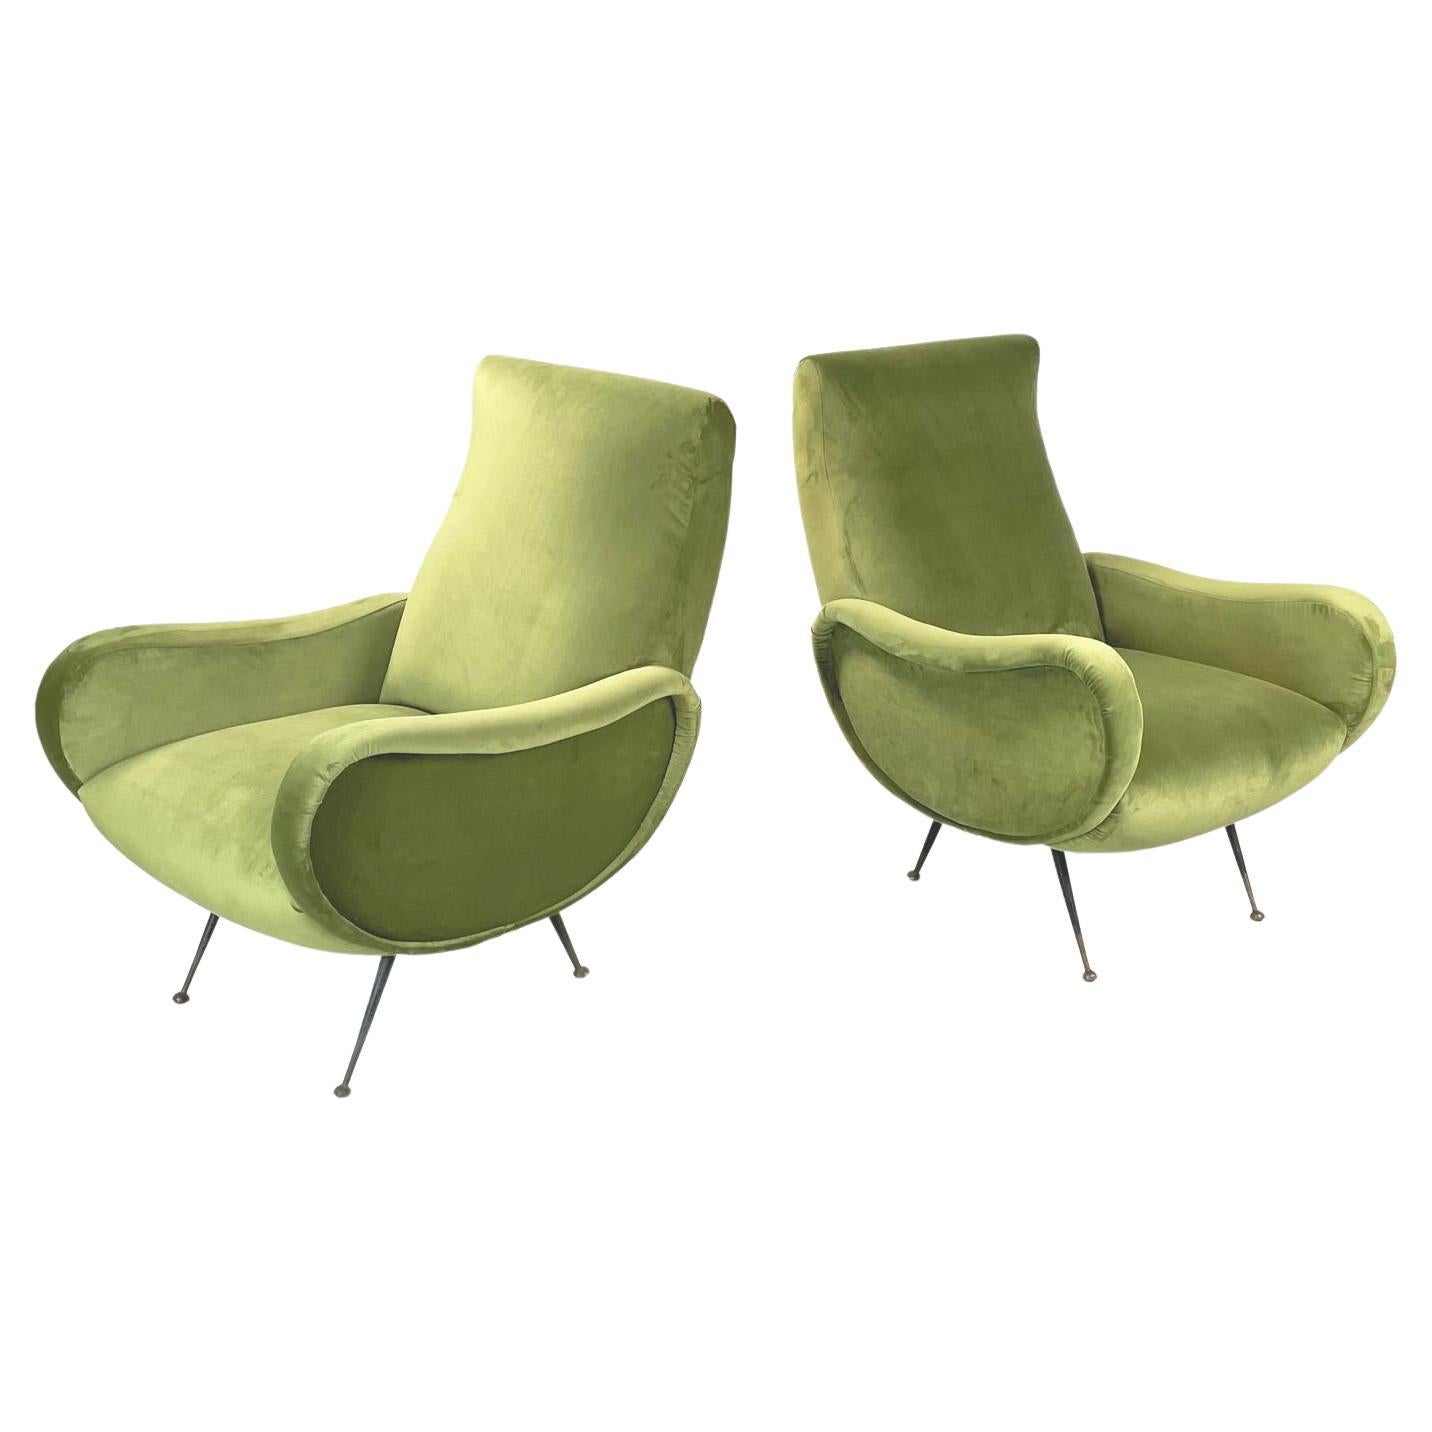 Italian Midcentury Green Velvet and Black Metal Armchairs in Lady Style, 1950s For Sale